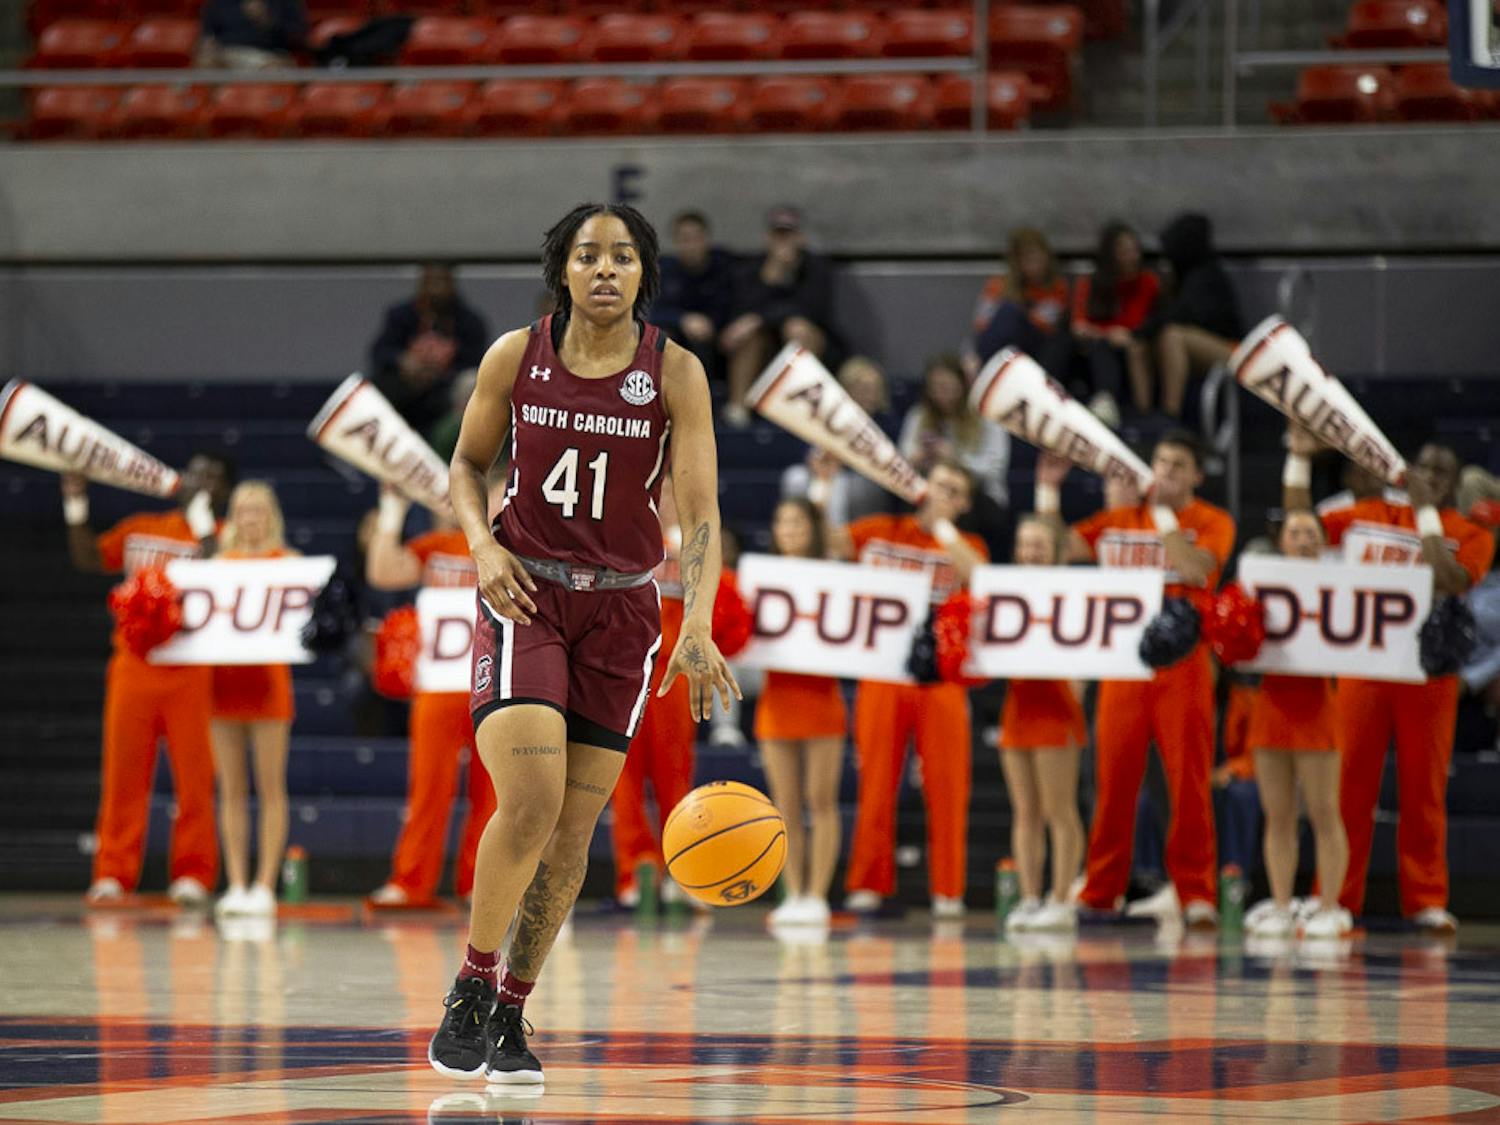 The South Carolina women's basketball team took on the Auburn Tigers on Feb. 9, 2023, beating them 83-48. This improves the Gamecocks to a 24-0 record overall and 11-0 in the SEC. The win also made program history, setting a program record with the first 30-game win streak in program history. The Gamecocks will return home and play No. 3 LSU on Feb. 12, 2023.&nbsp;